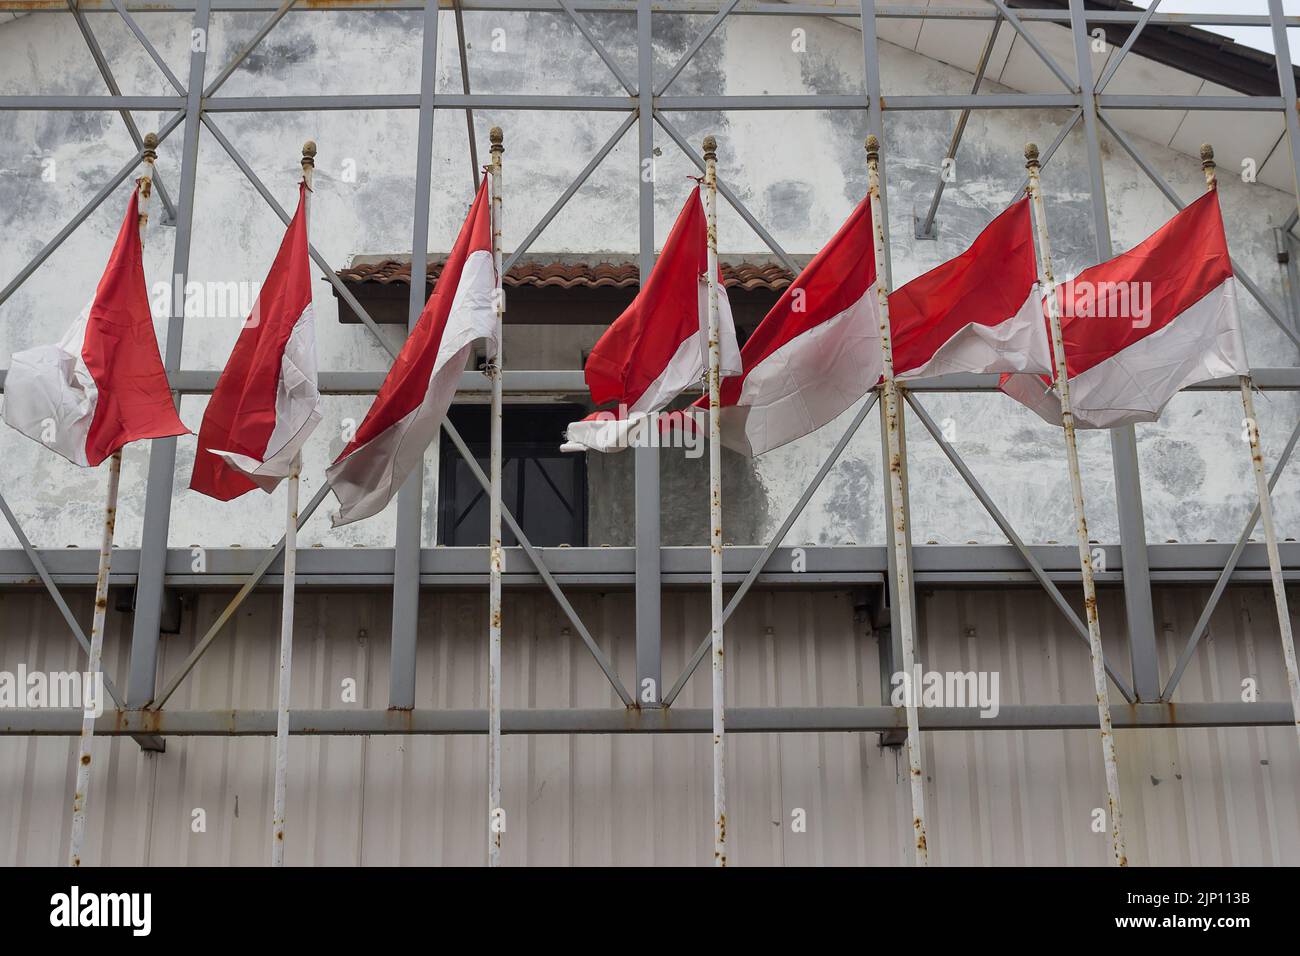 Indonesian flags waving in the sky Stock Photo